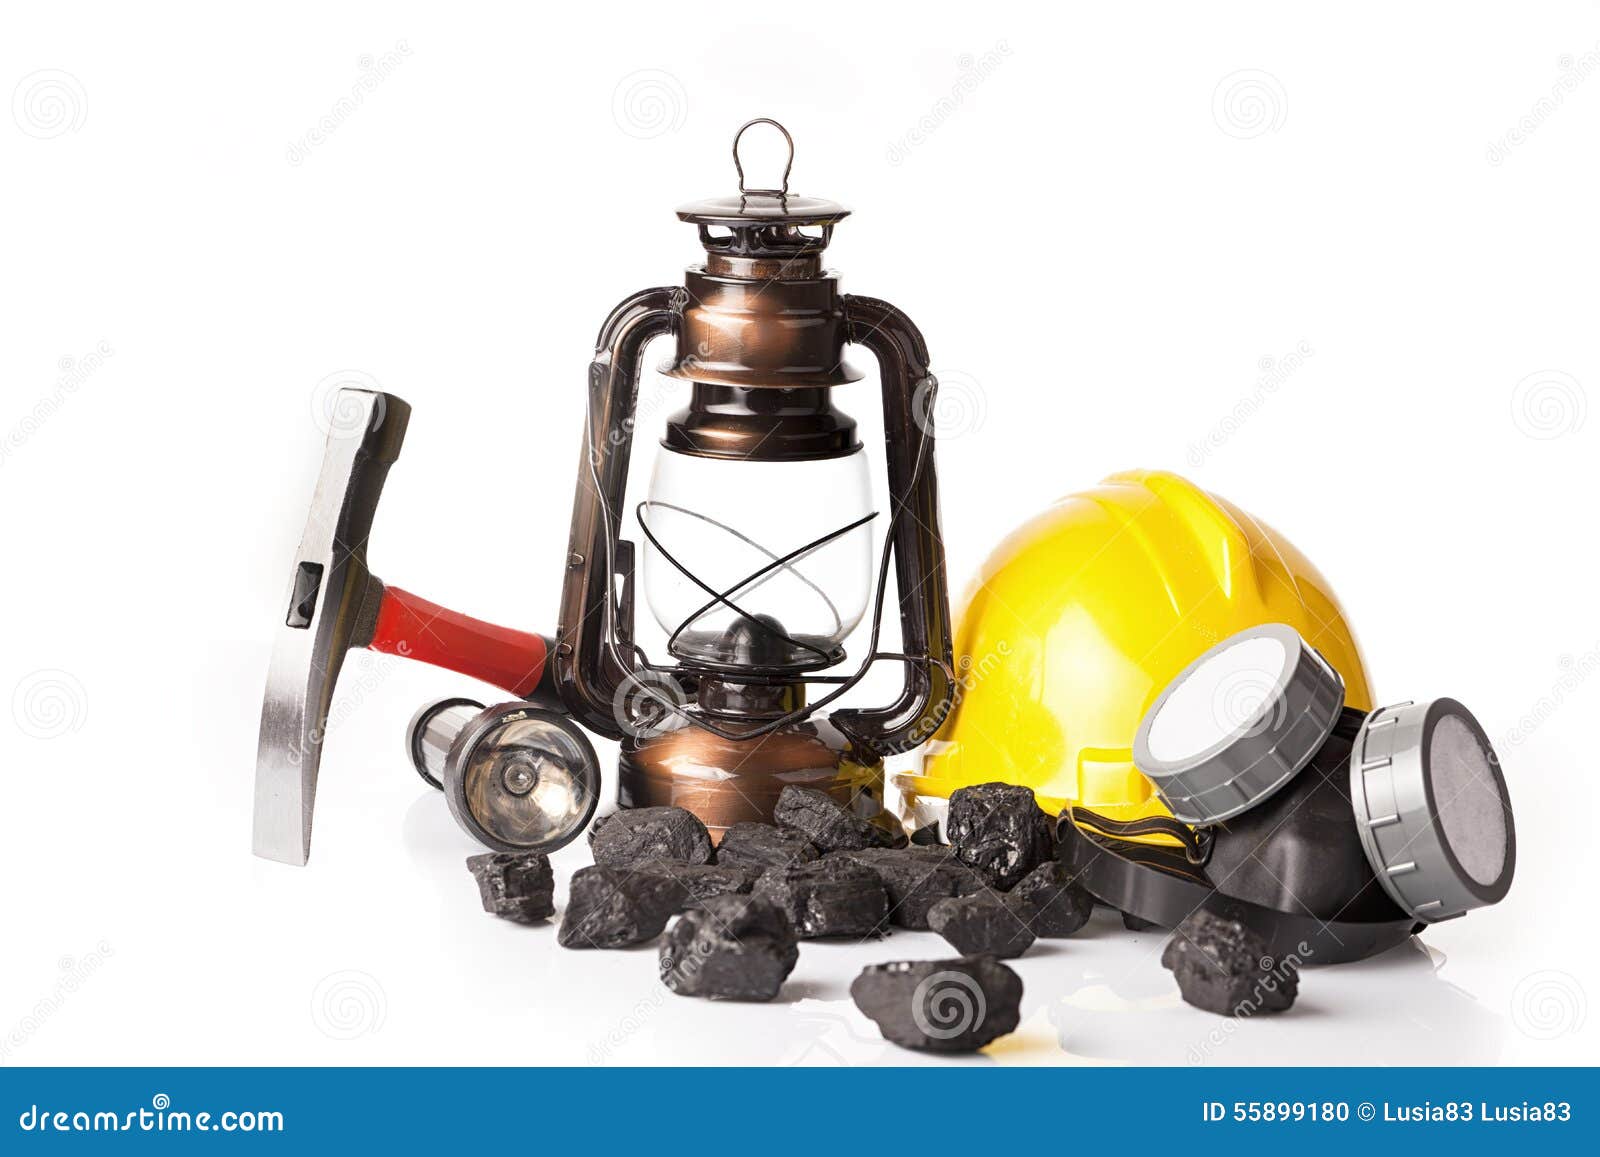 mining tools with protective helmet, ear muffs and oil lantern